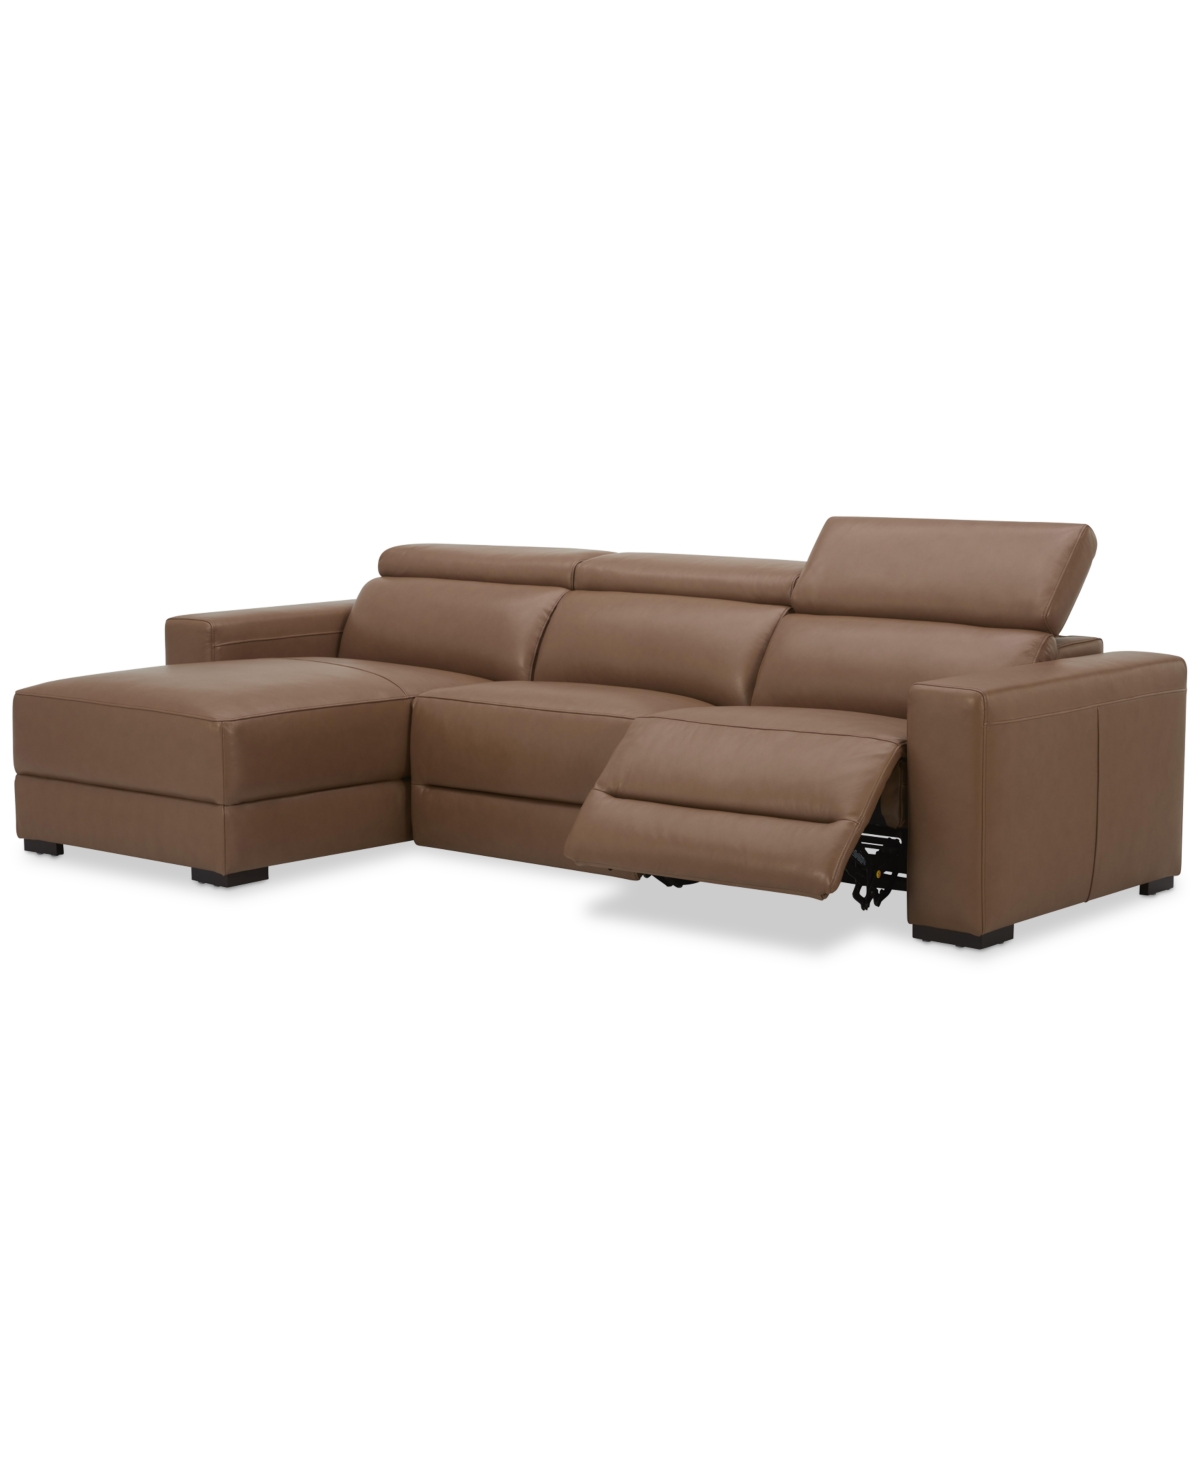 Macy's Nevio 115" 3-pc. Leather Sectional With 1 Power Recliner, Headrests And Chaise, Created For  In Light Grey